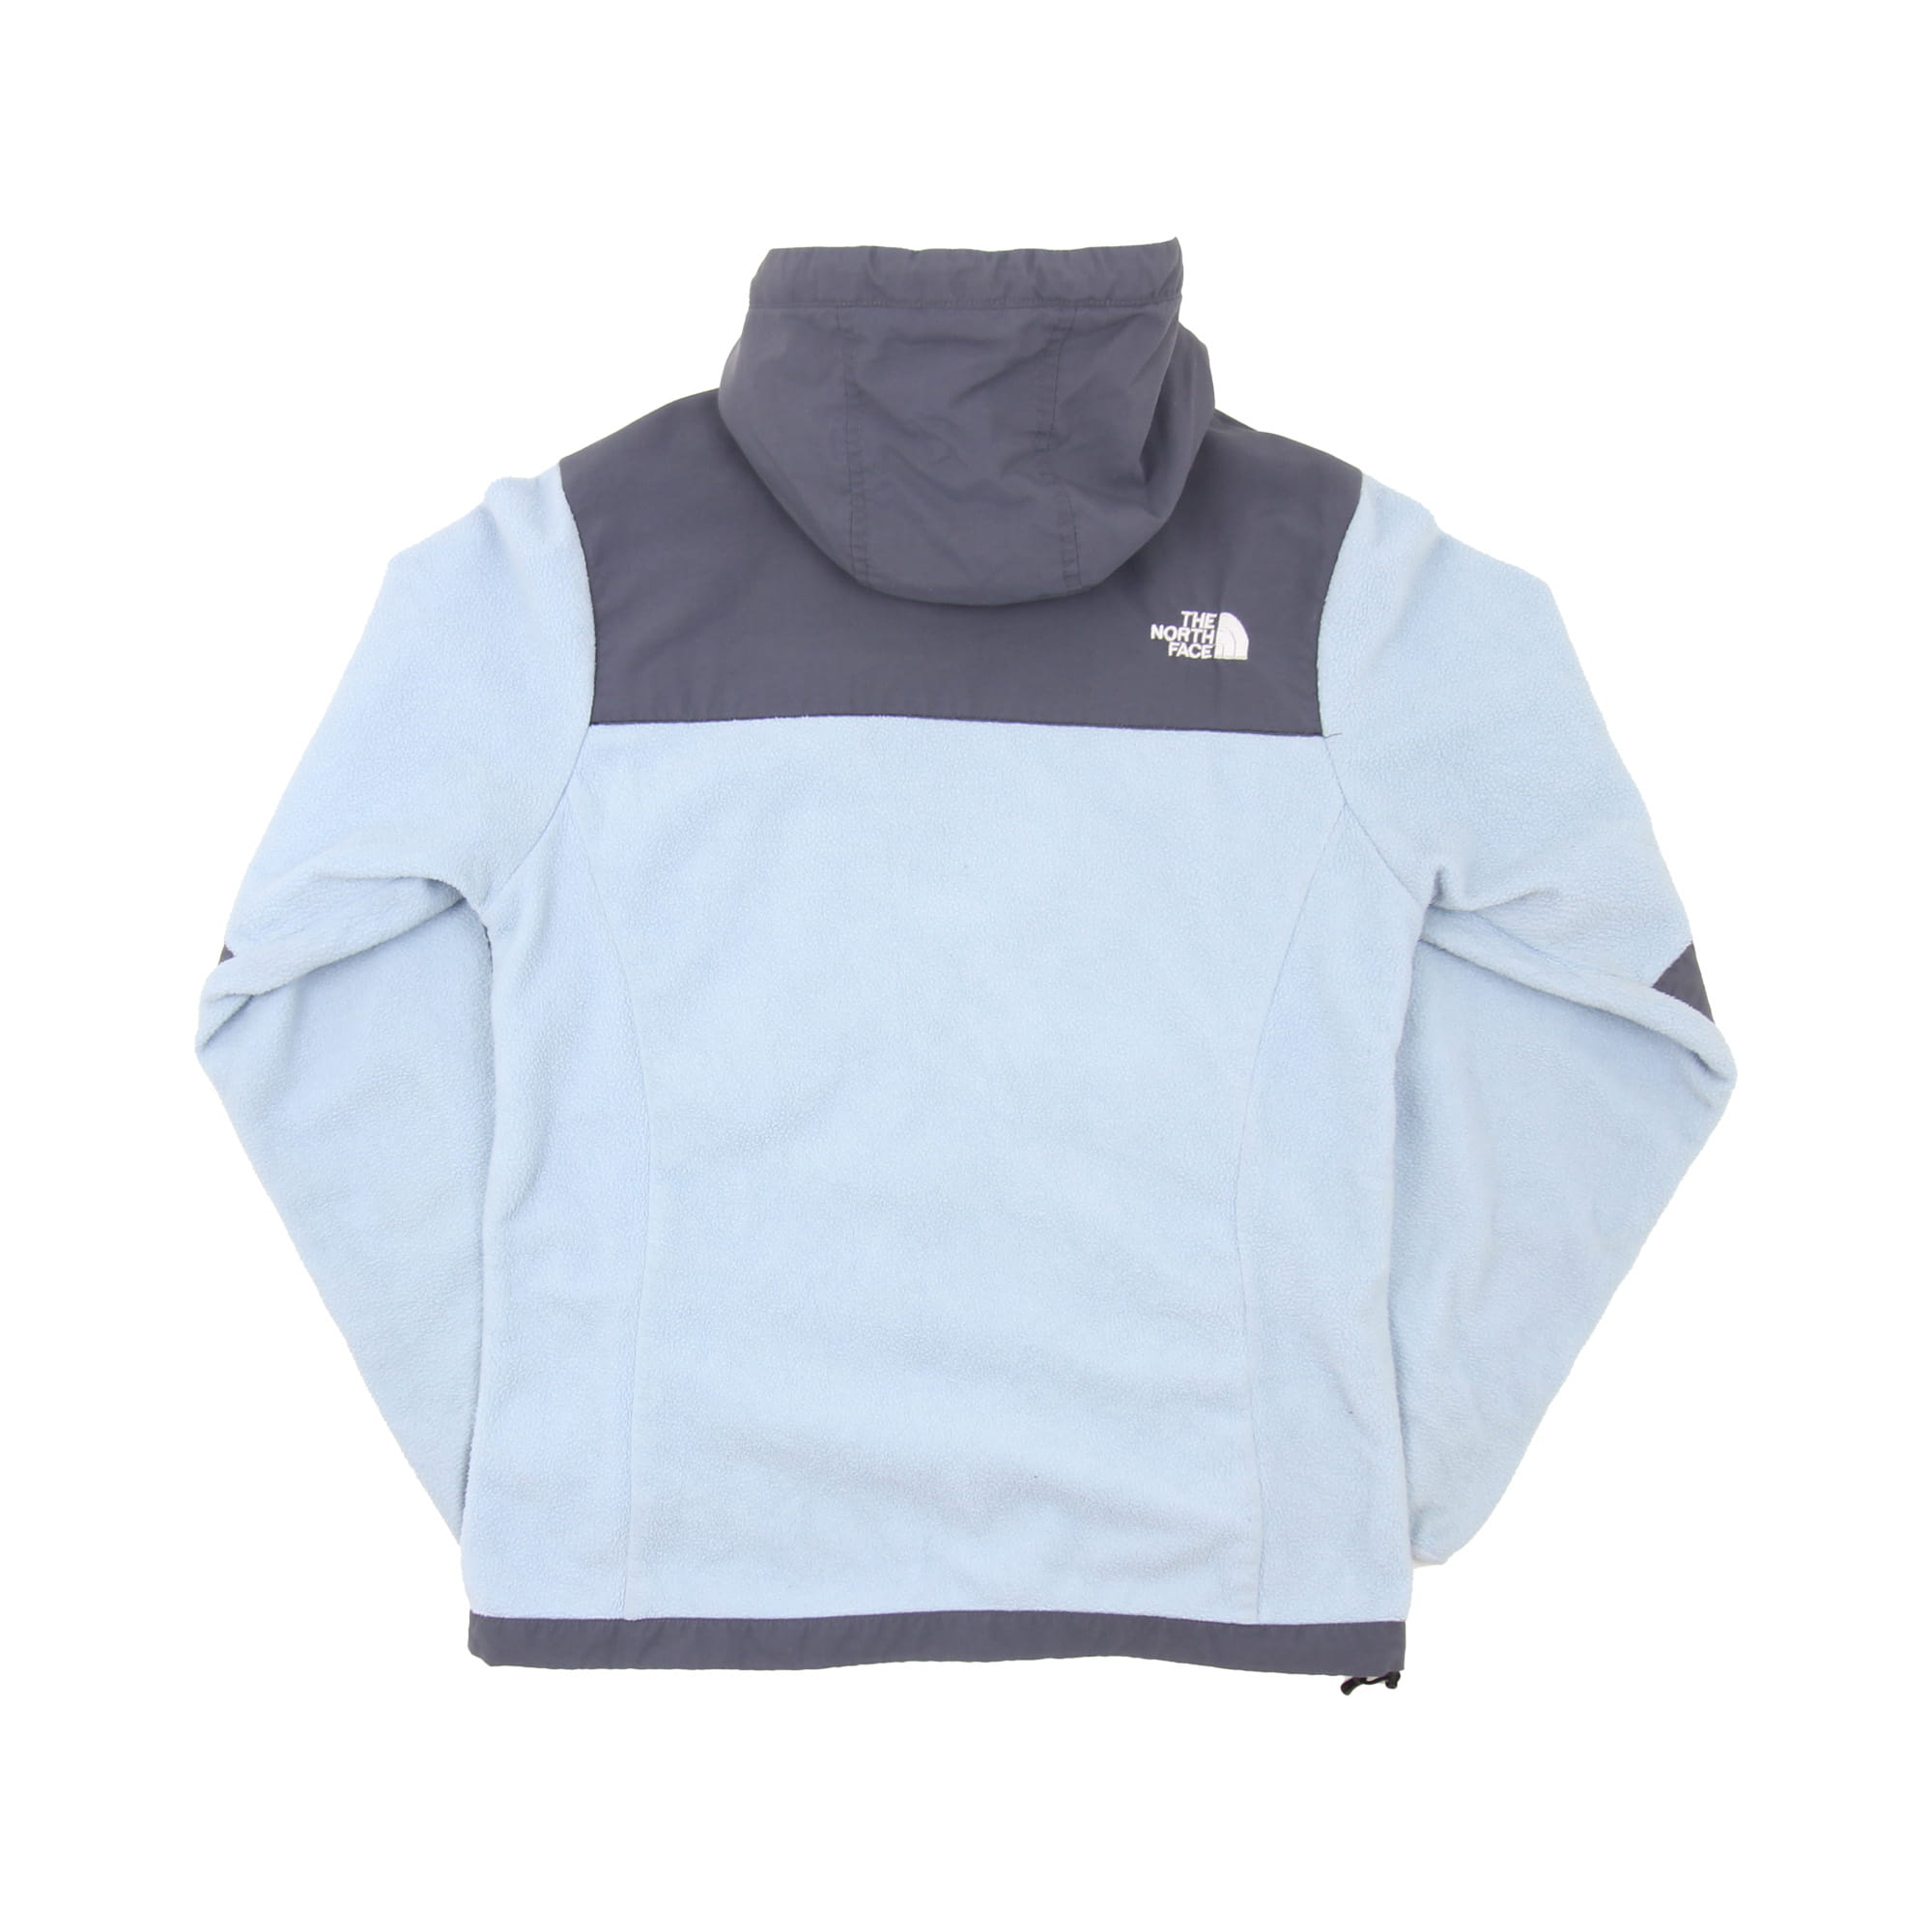 The North Face Embroidered Logo Fleece - Women's S